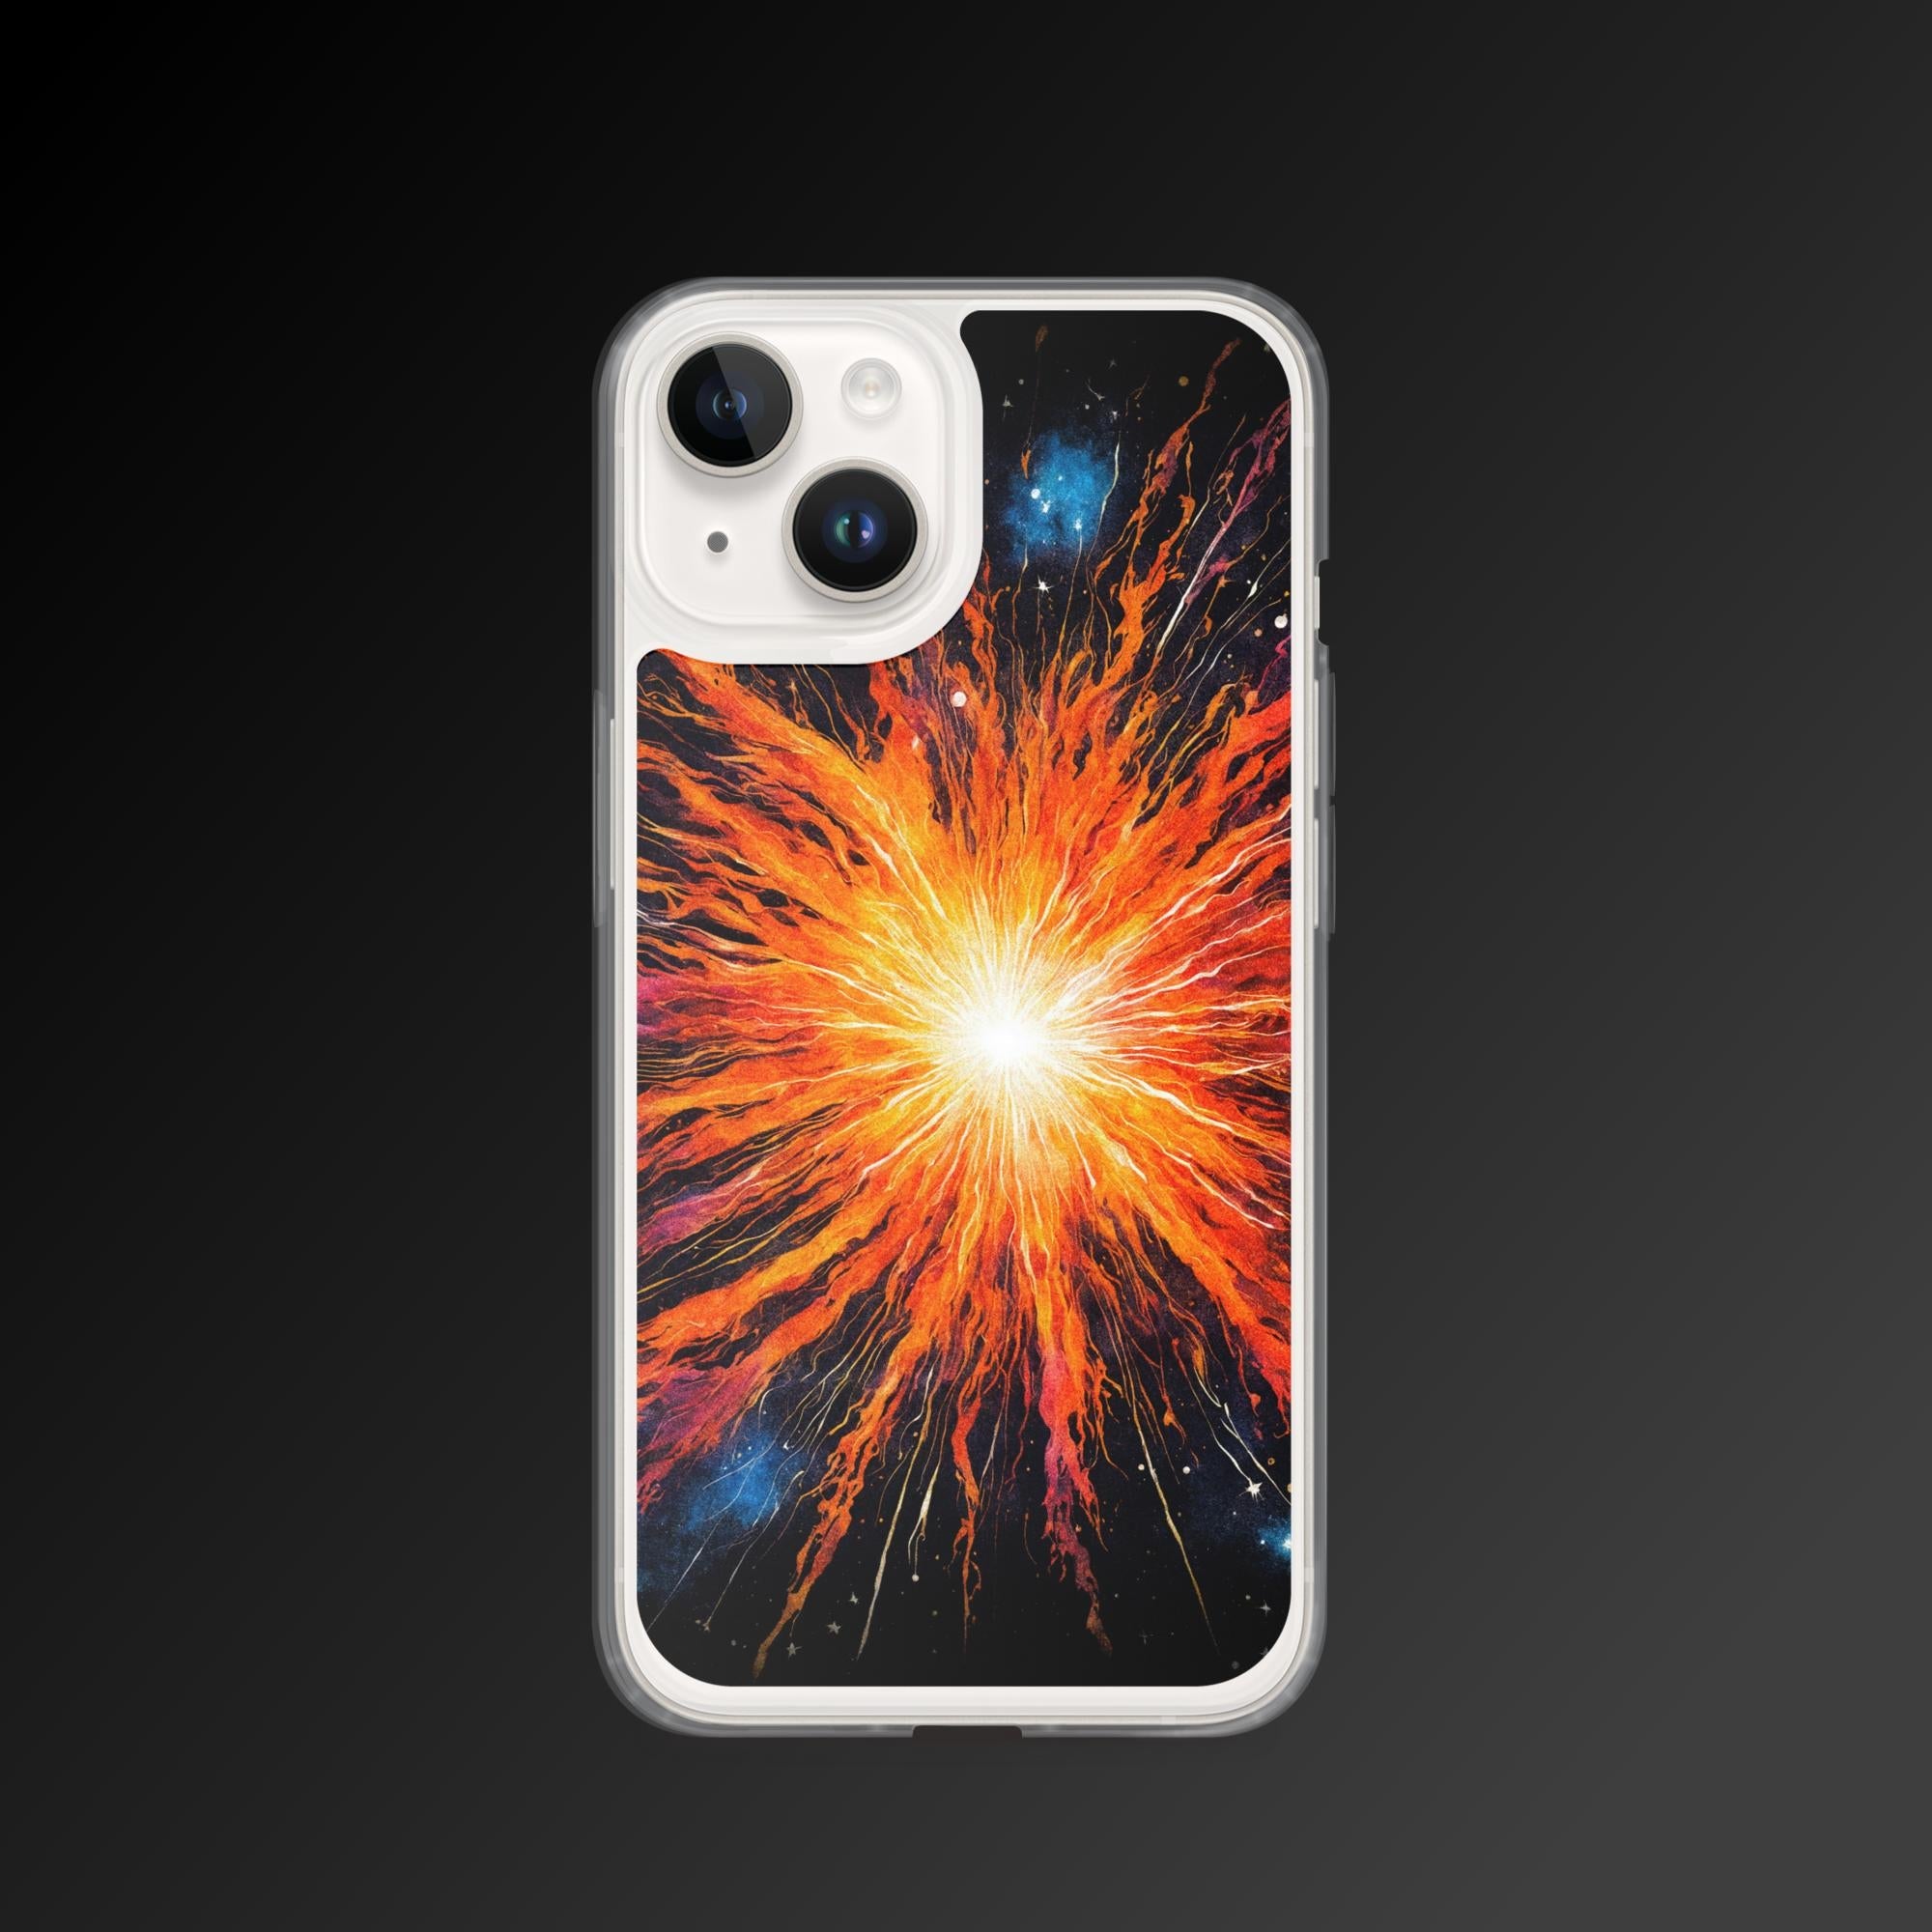 "Sun flare crack" clear iphone case - Clear iphone case - Ever colorful